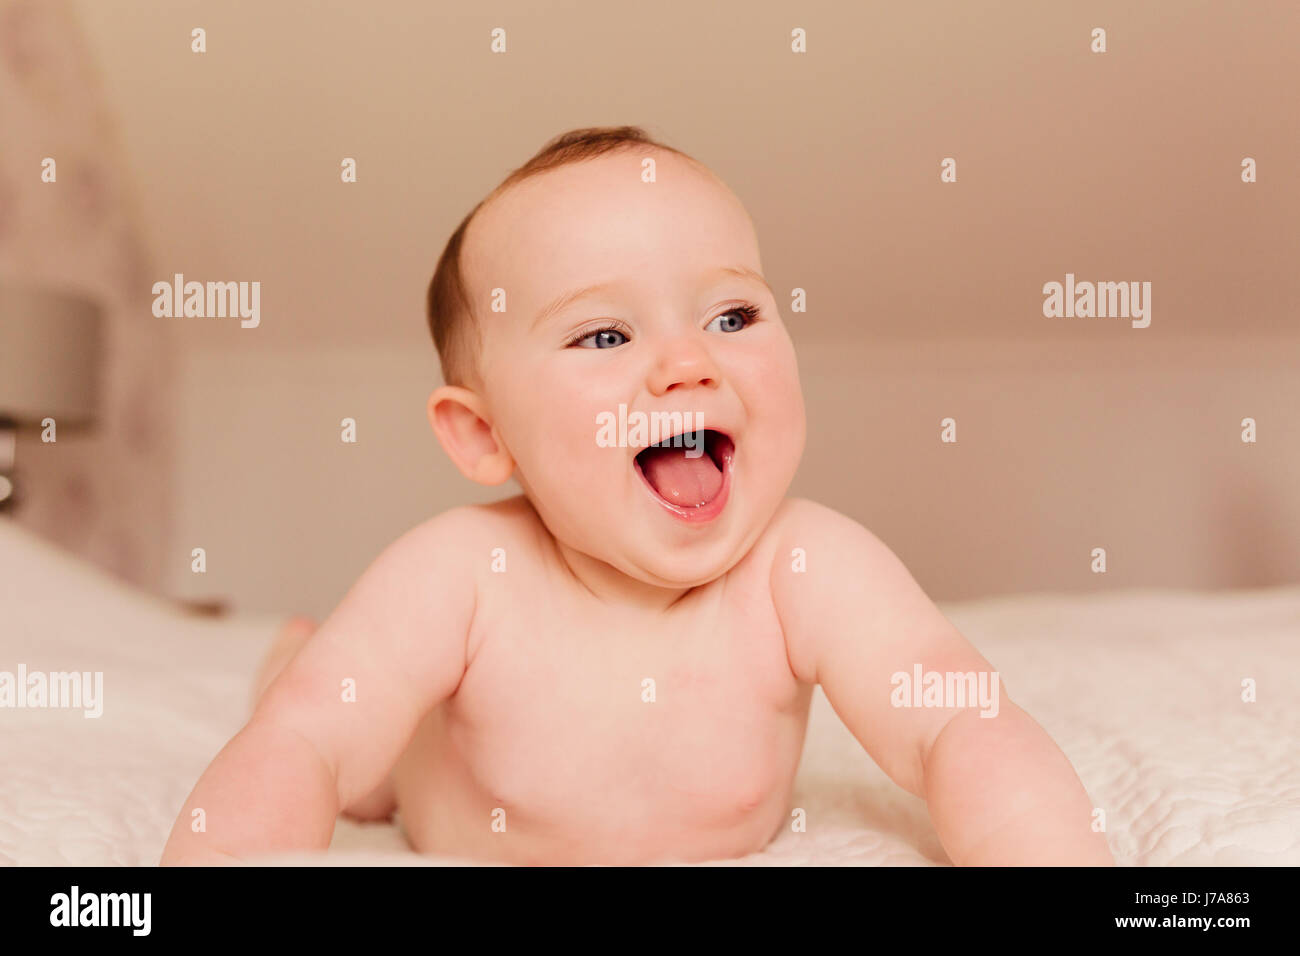 Portrait of laughing baby girl on bed Stock Photo